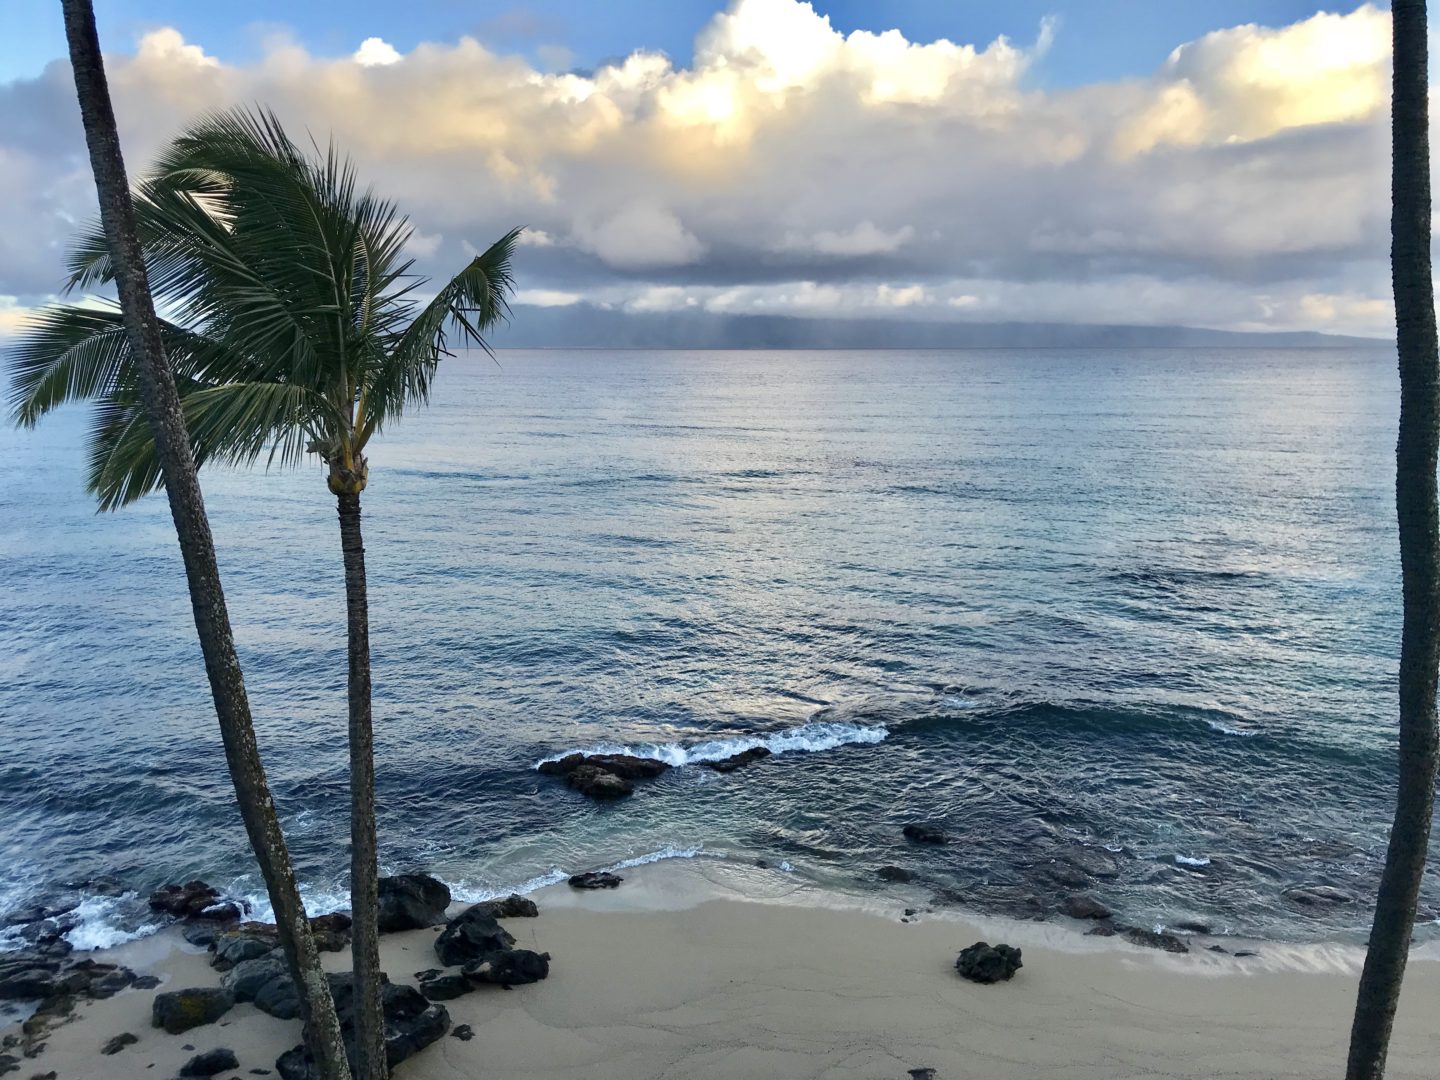 The view from our balcony in Maui was spectacular! What a treat to wake up to this!